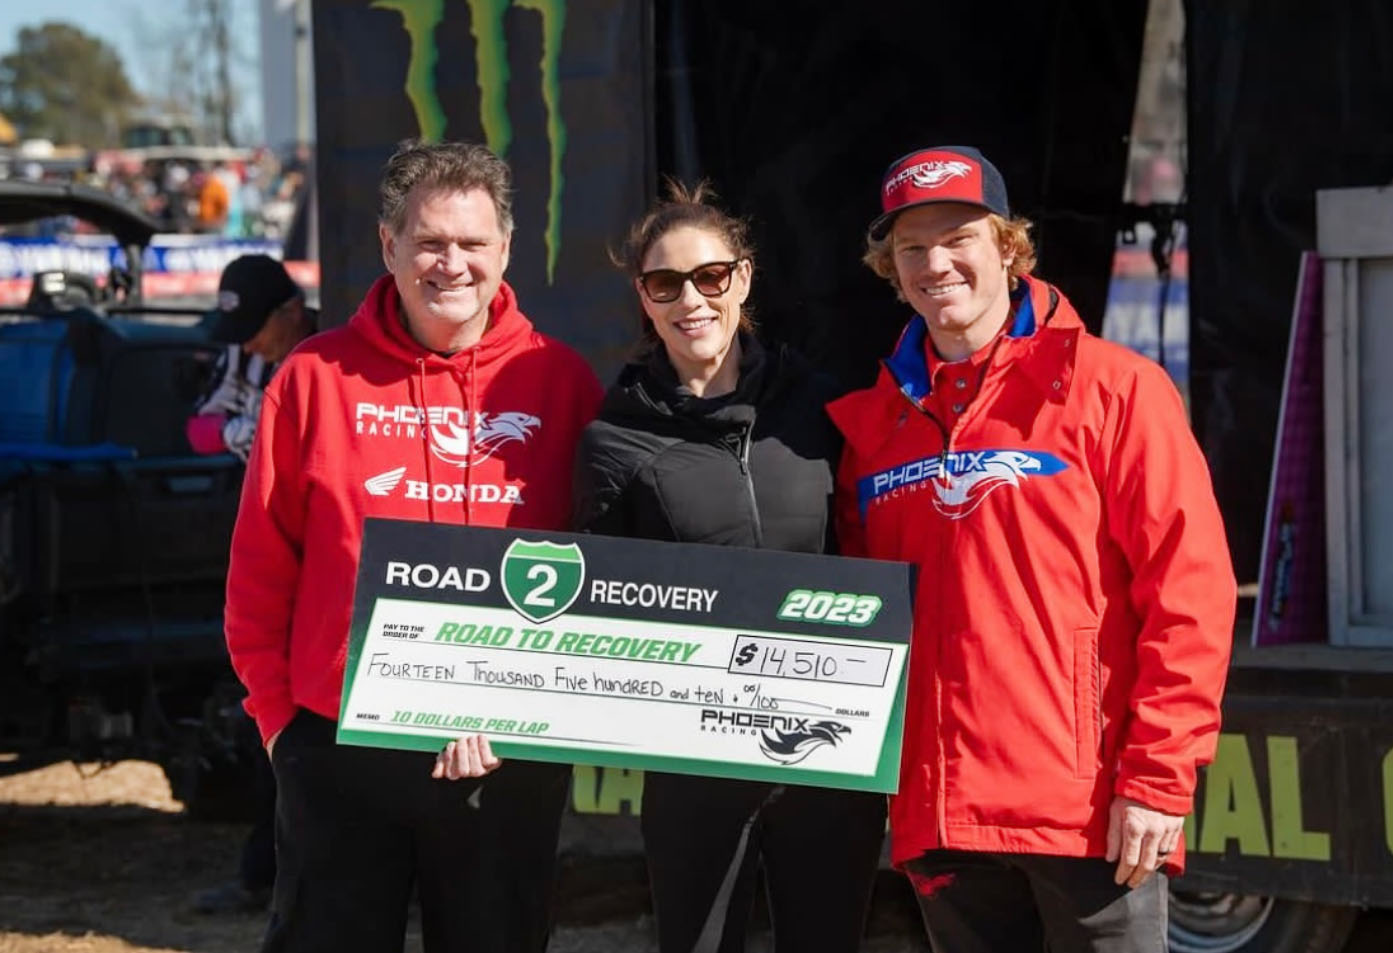 Phoenix Racing Team presenting donation check to Road to Recovery team